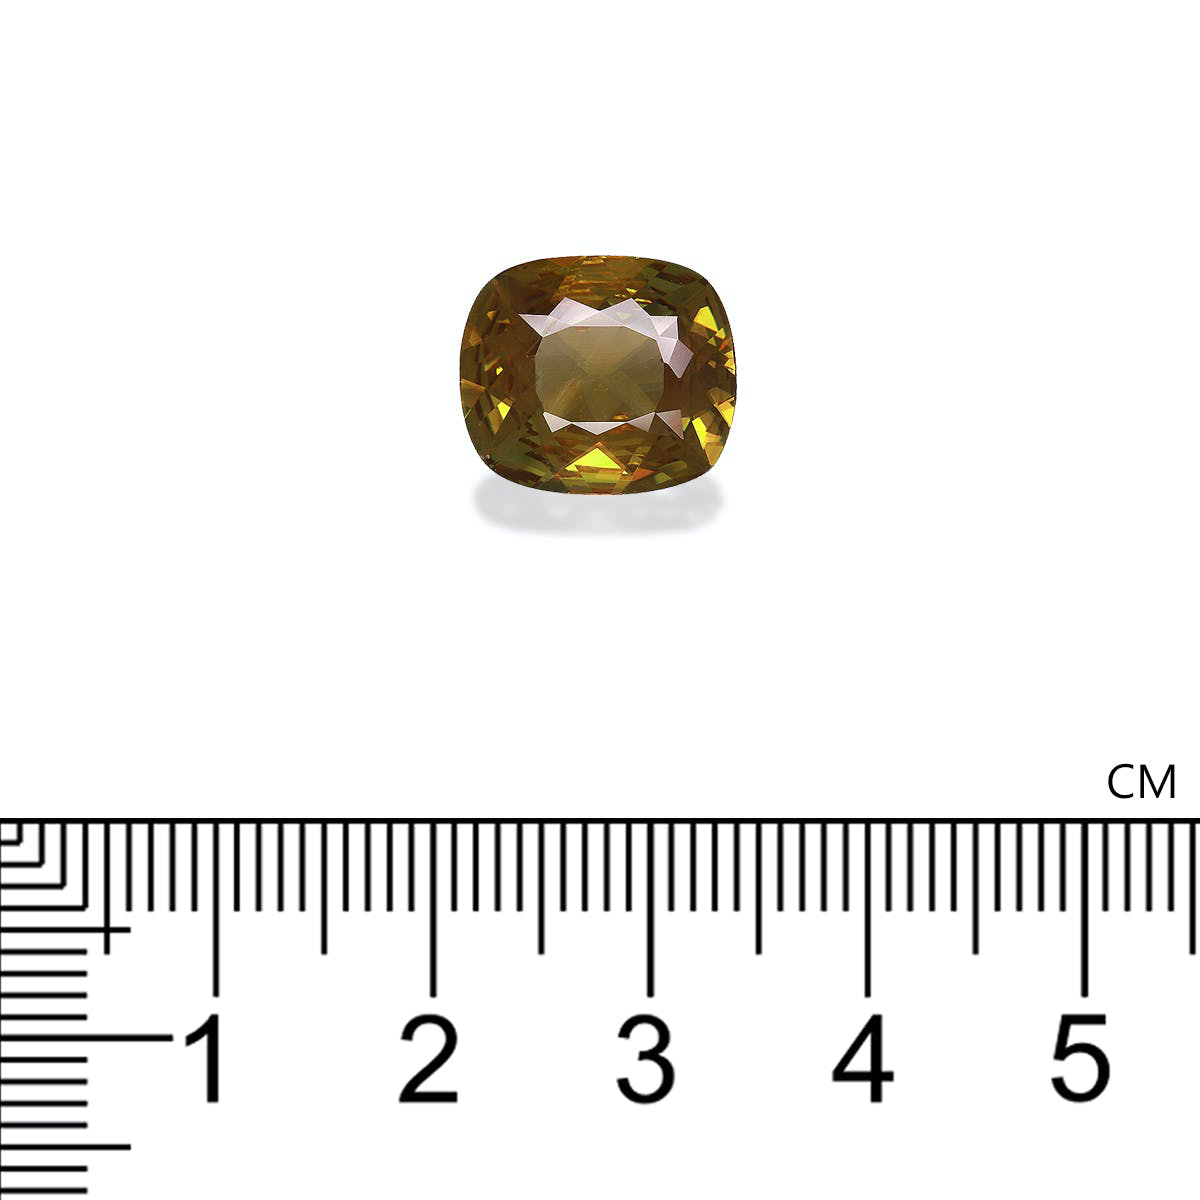 Picture of Forest Green Sphene 5.76ct - 13x11mm (SH0470)